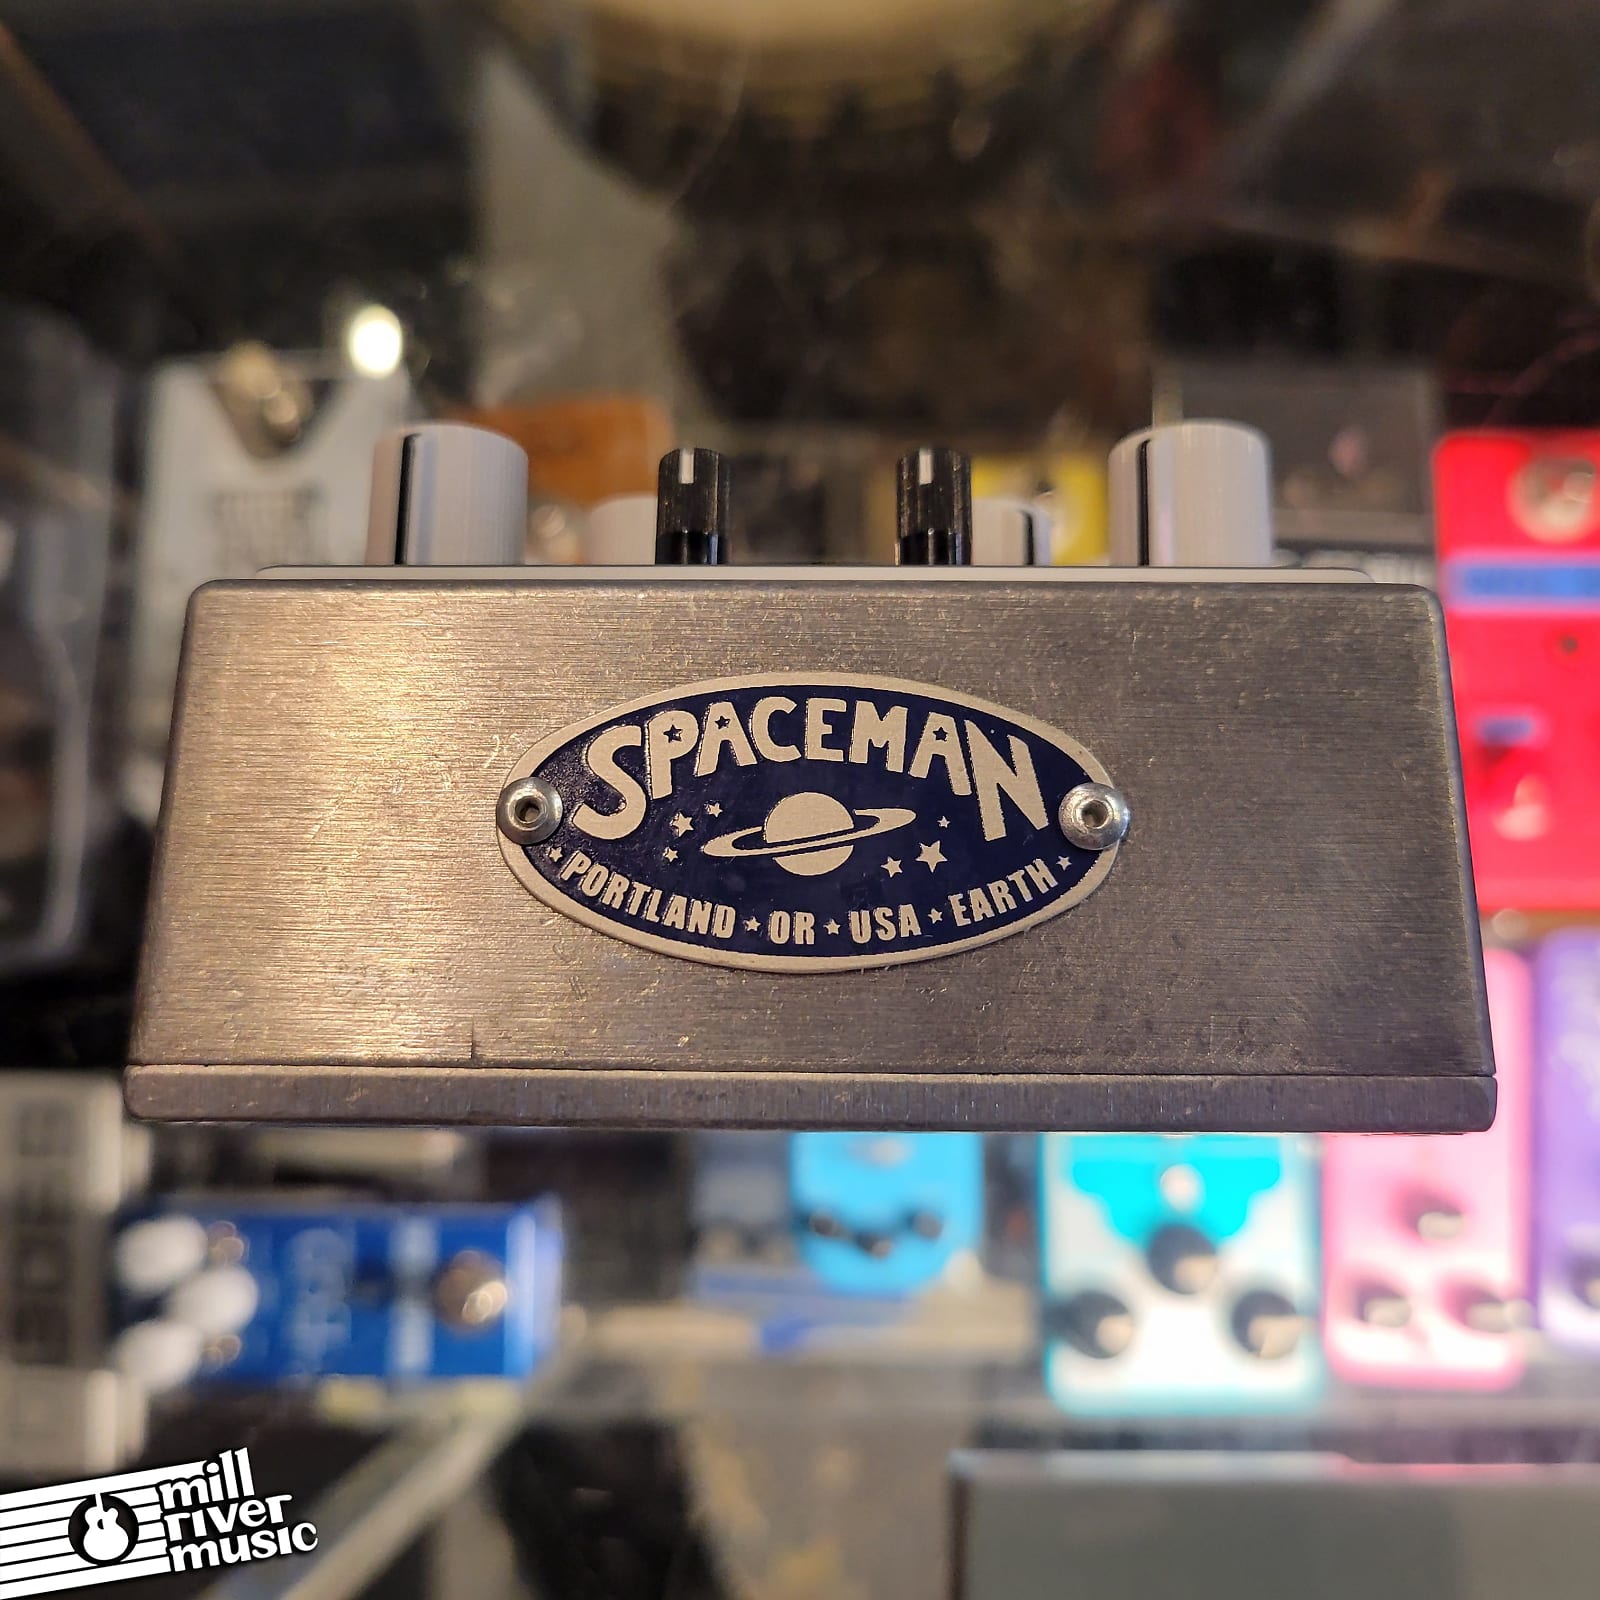 Spaceman Effects Artemis Modulated Filter Effects Pedal Used